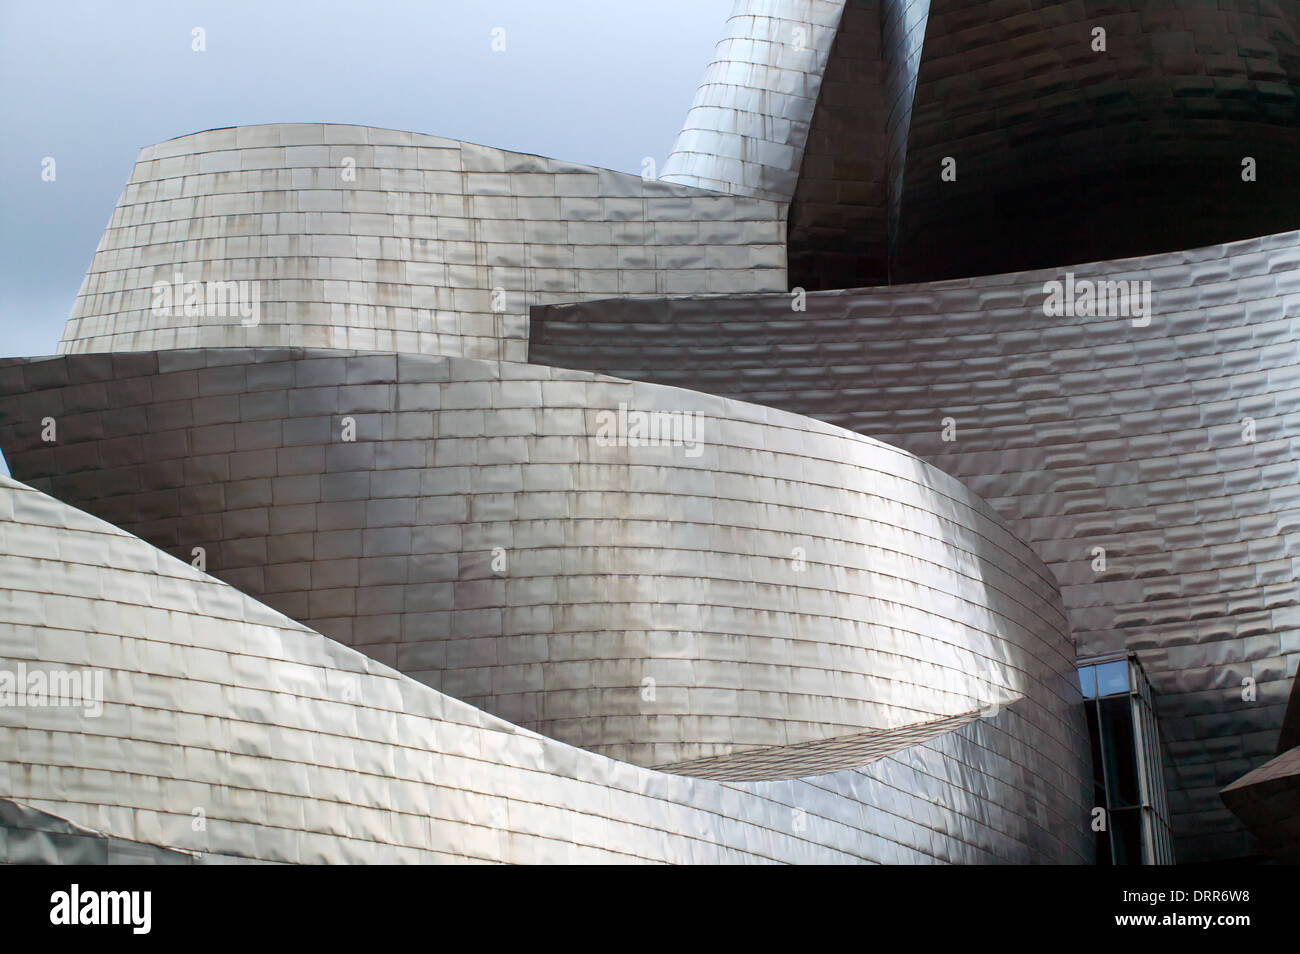 Close-up view of  the central section of the Guggenheim Museum, Bilbao, Spain. Stock Photo